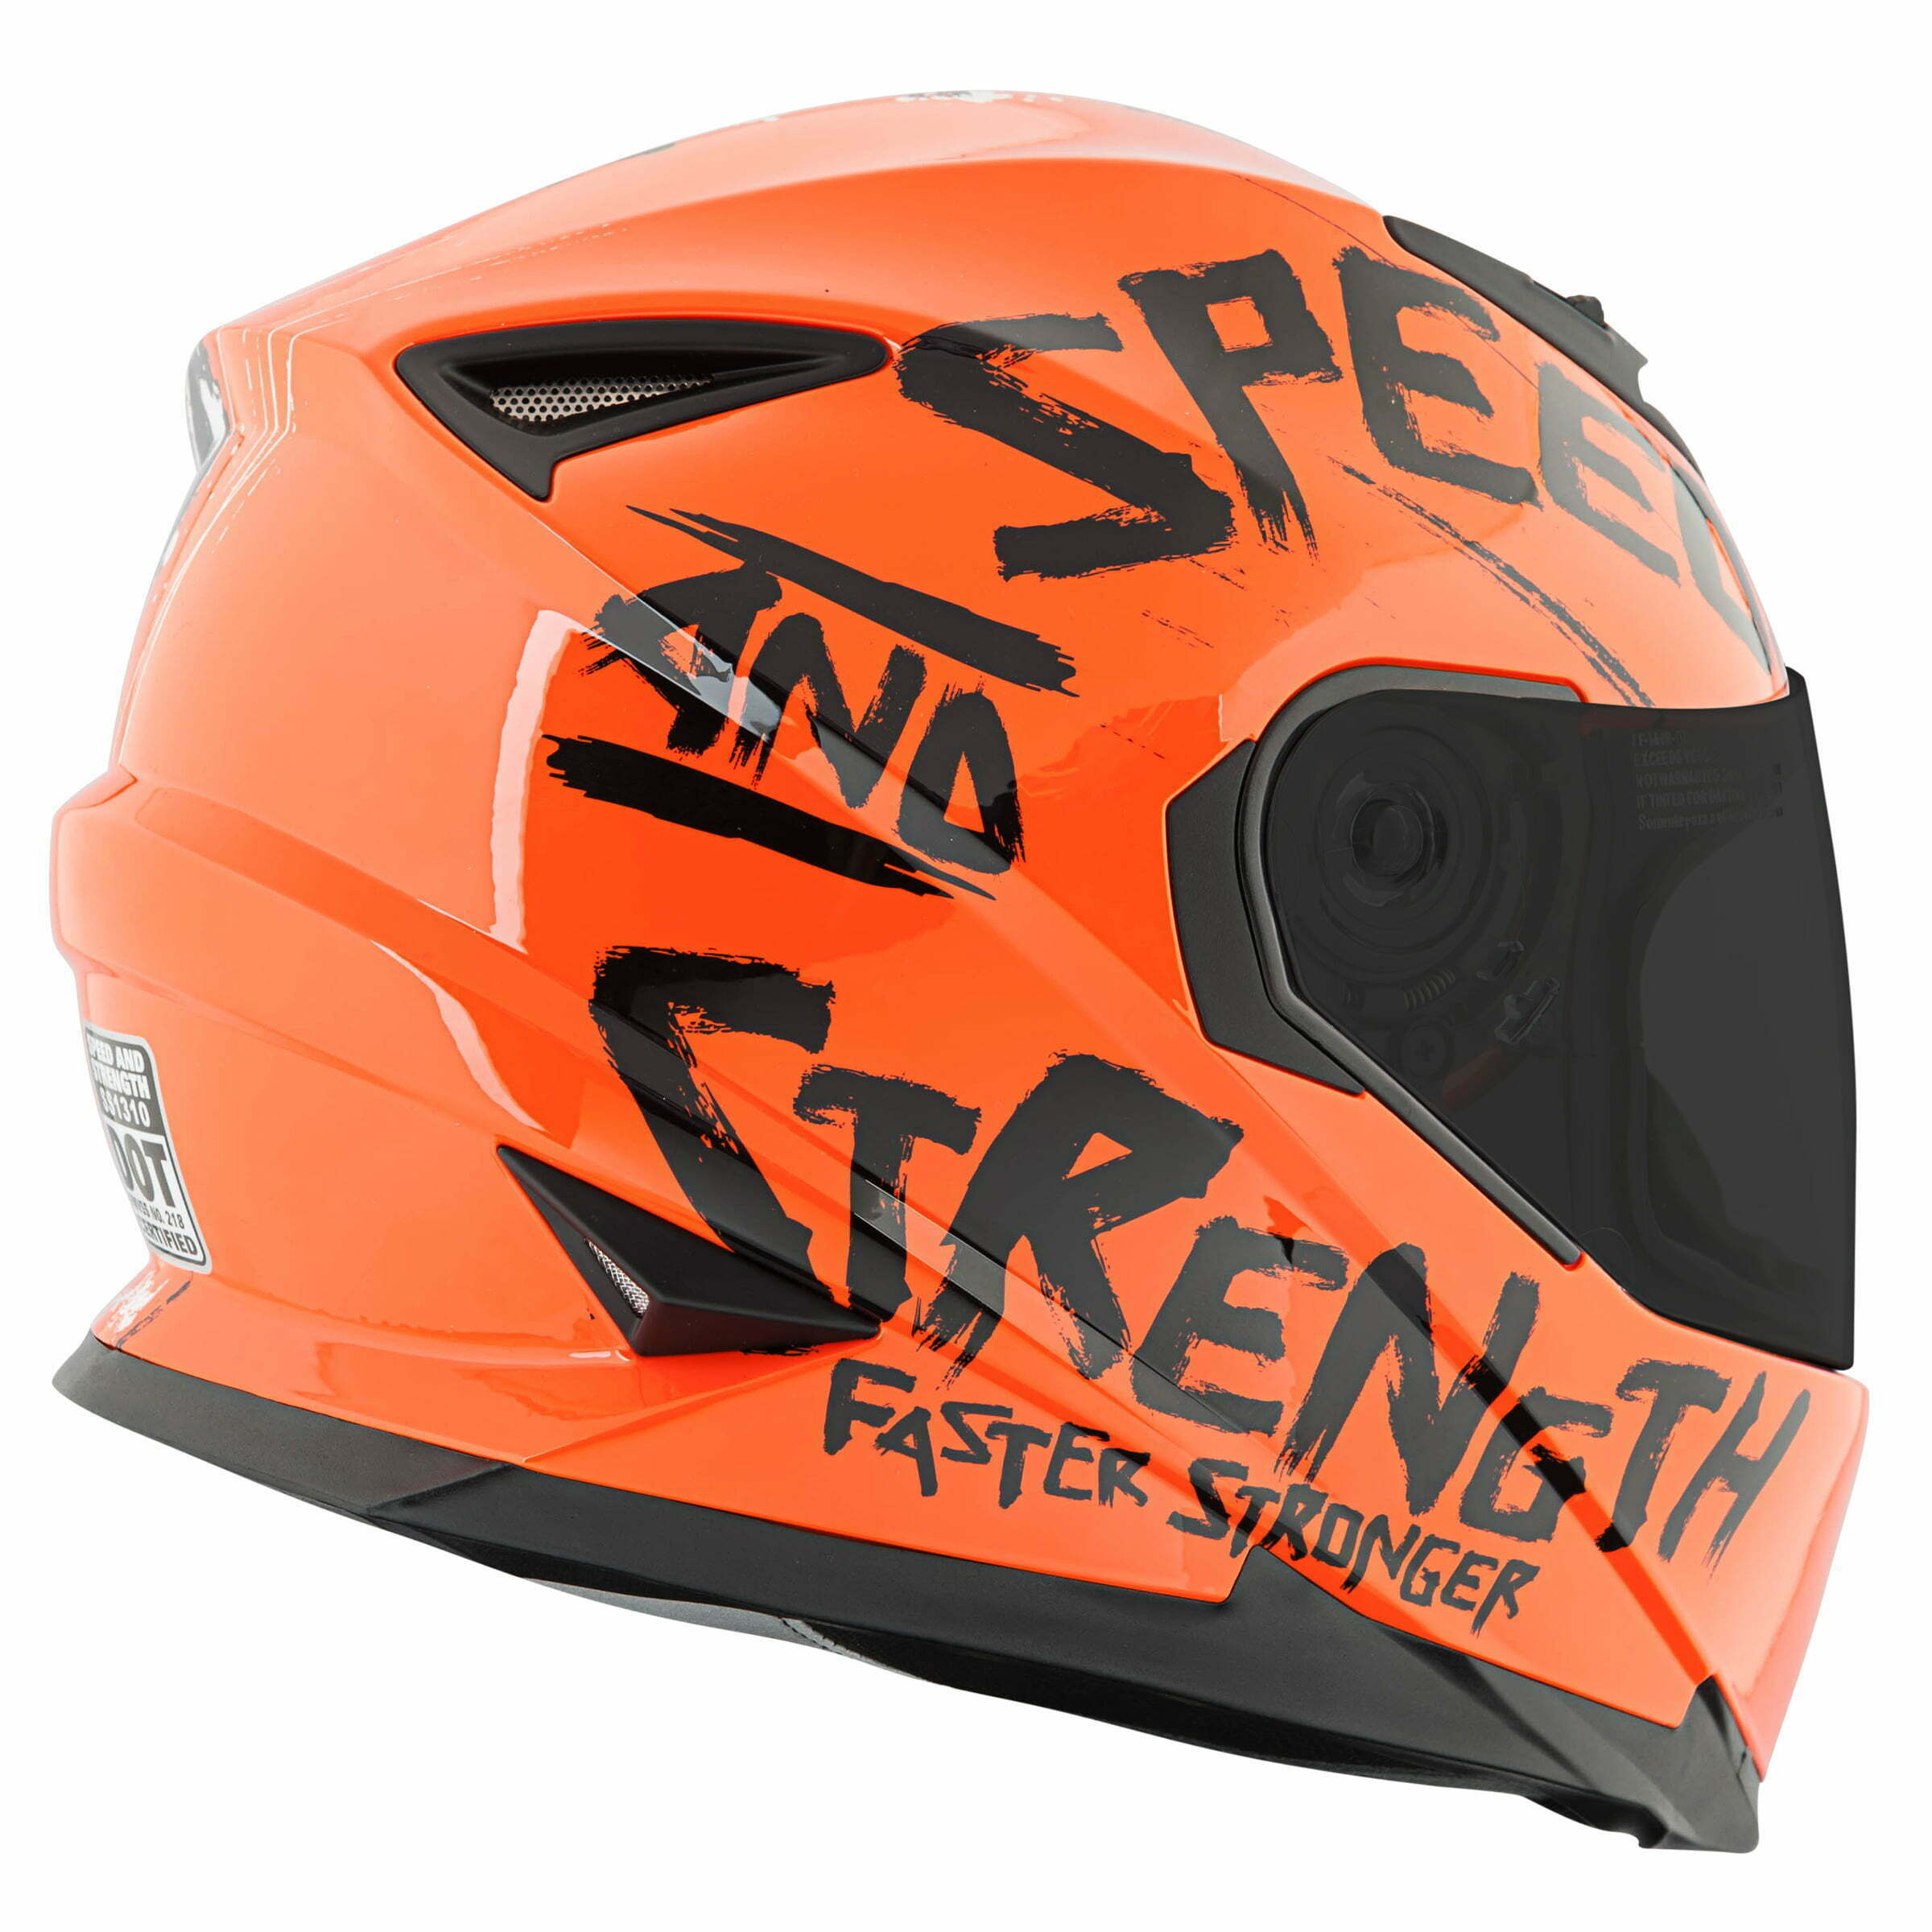 ss1310 bikes are in my blood helmet